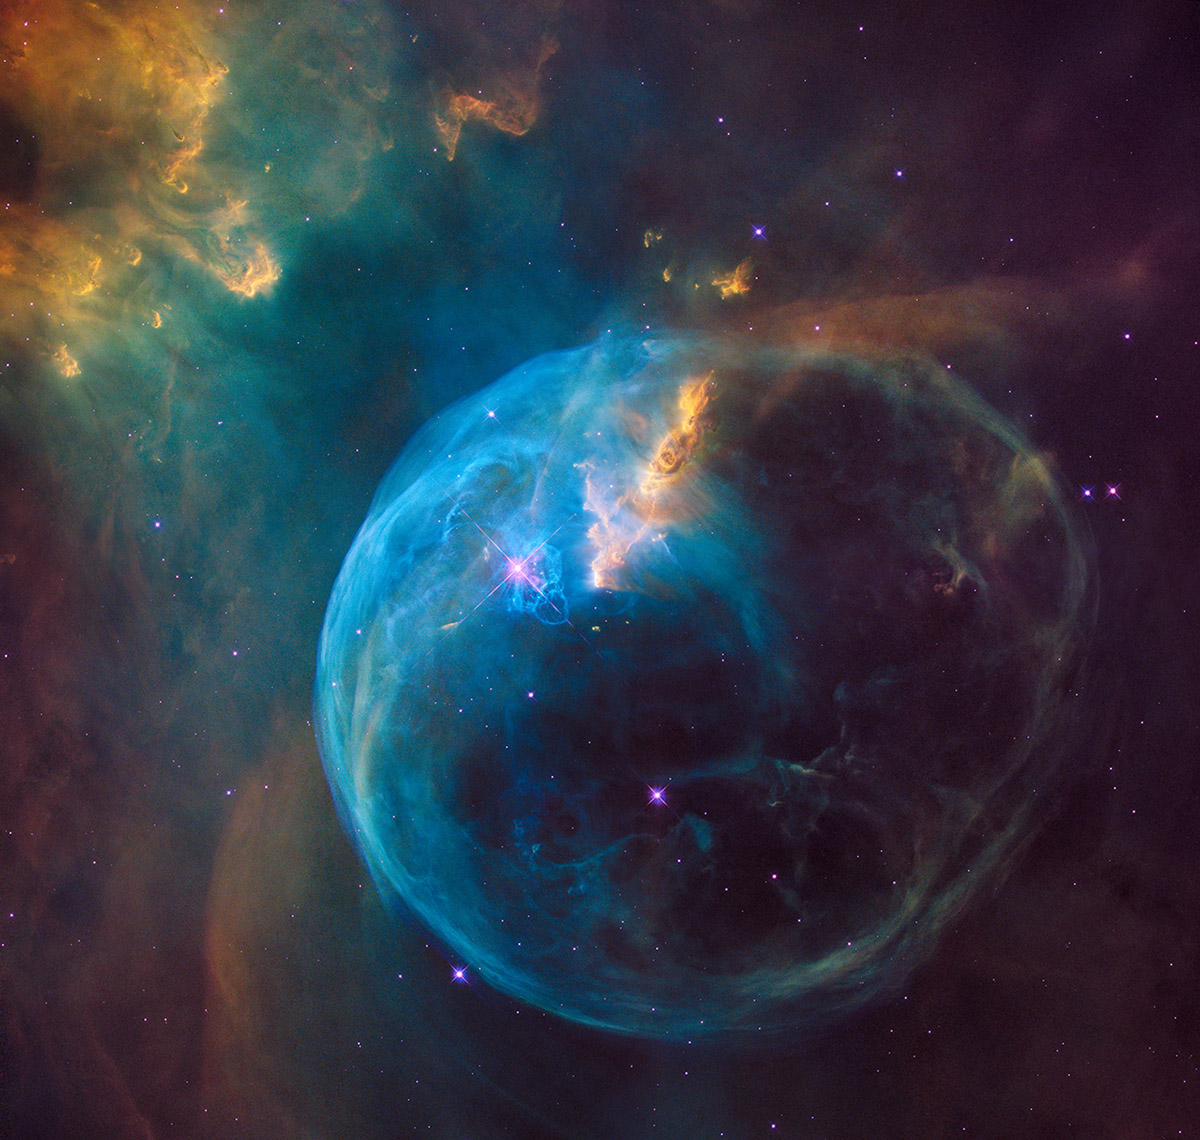 The Bubble Nebula, also known as NGC 7635, is an emission nebula located 8000 light-years away. This image was released on April 21, 2016.